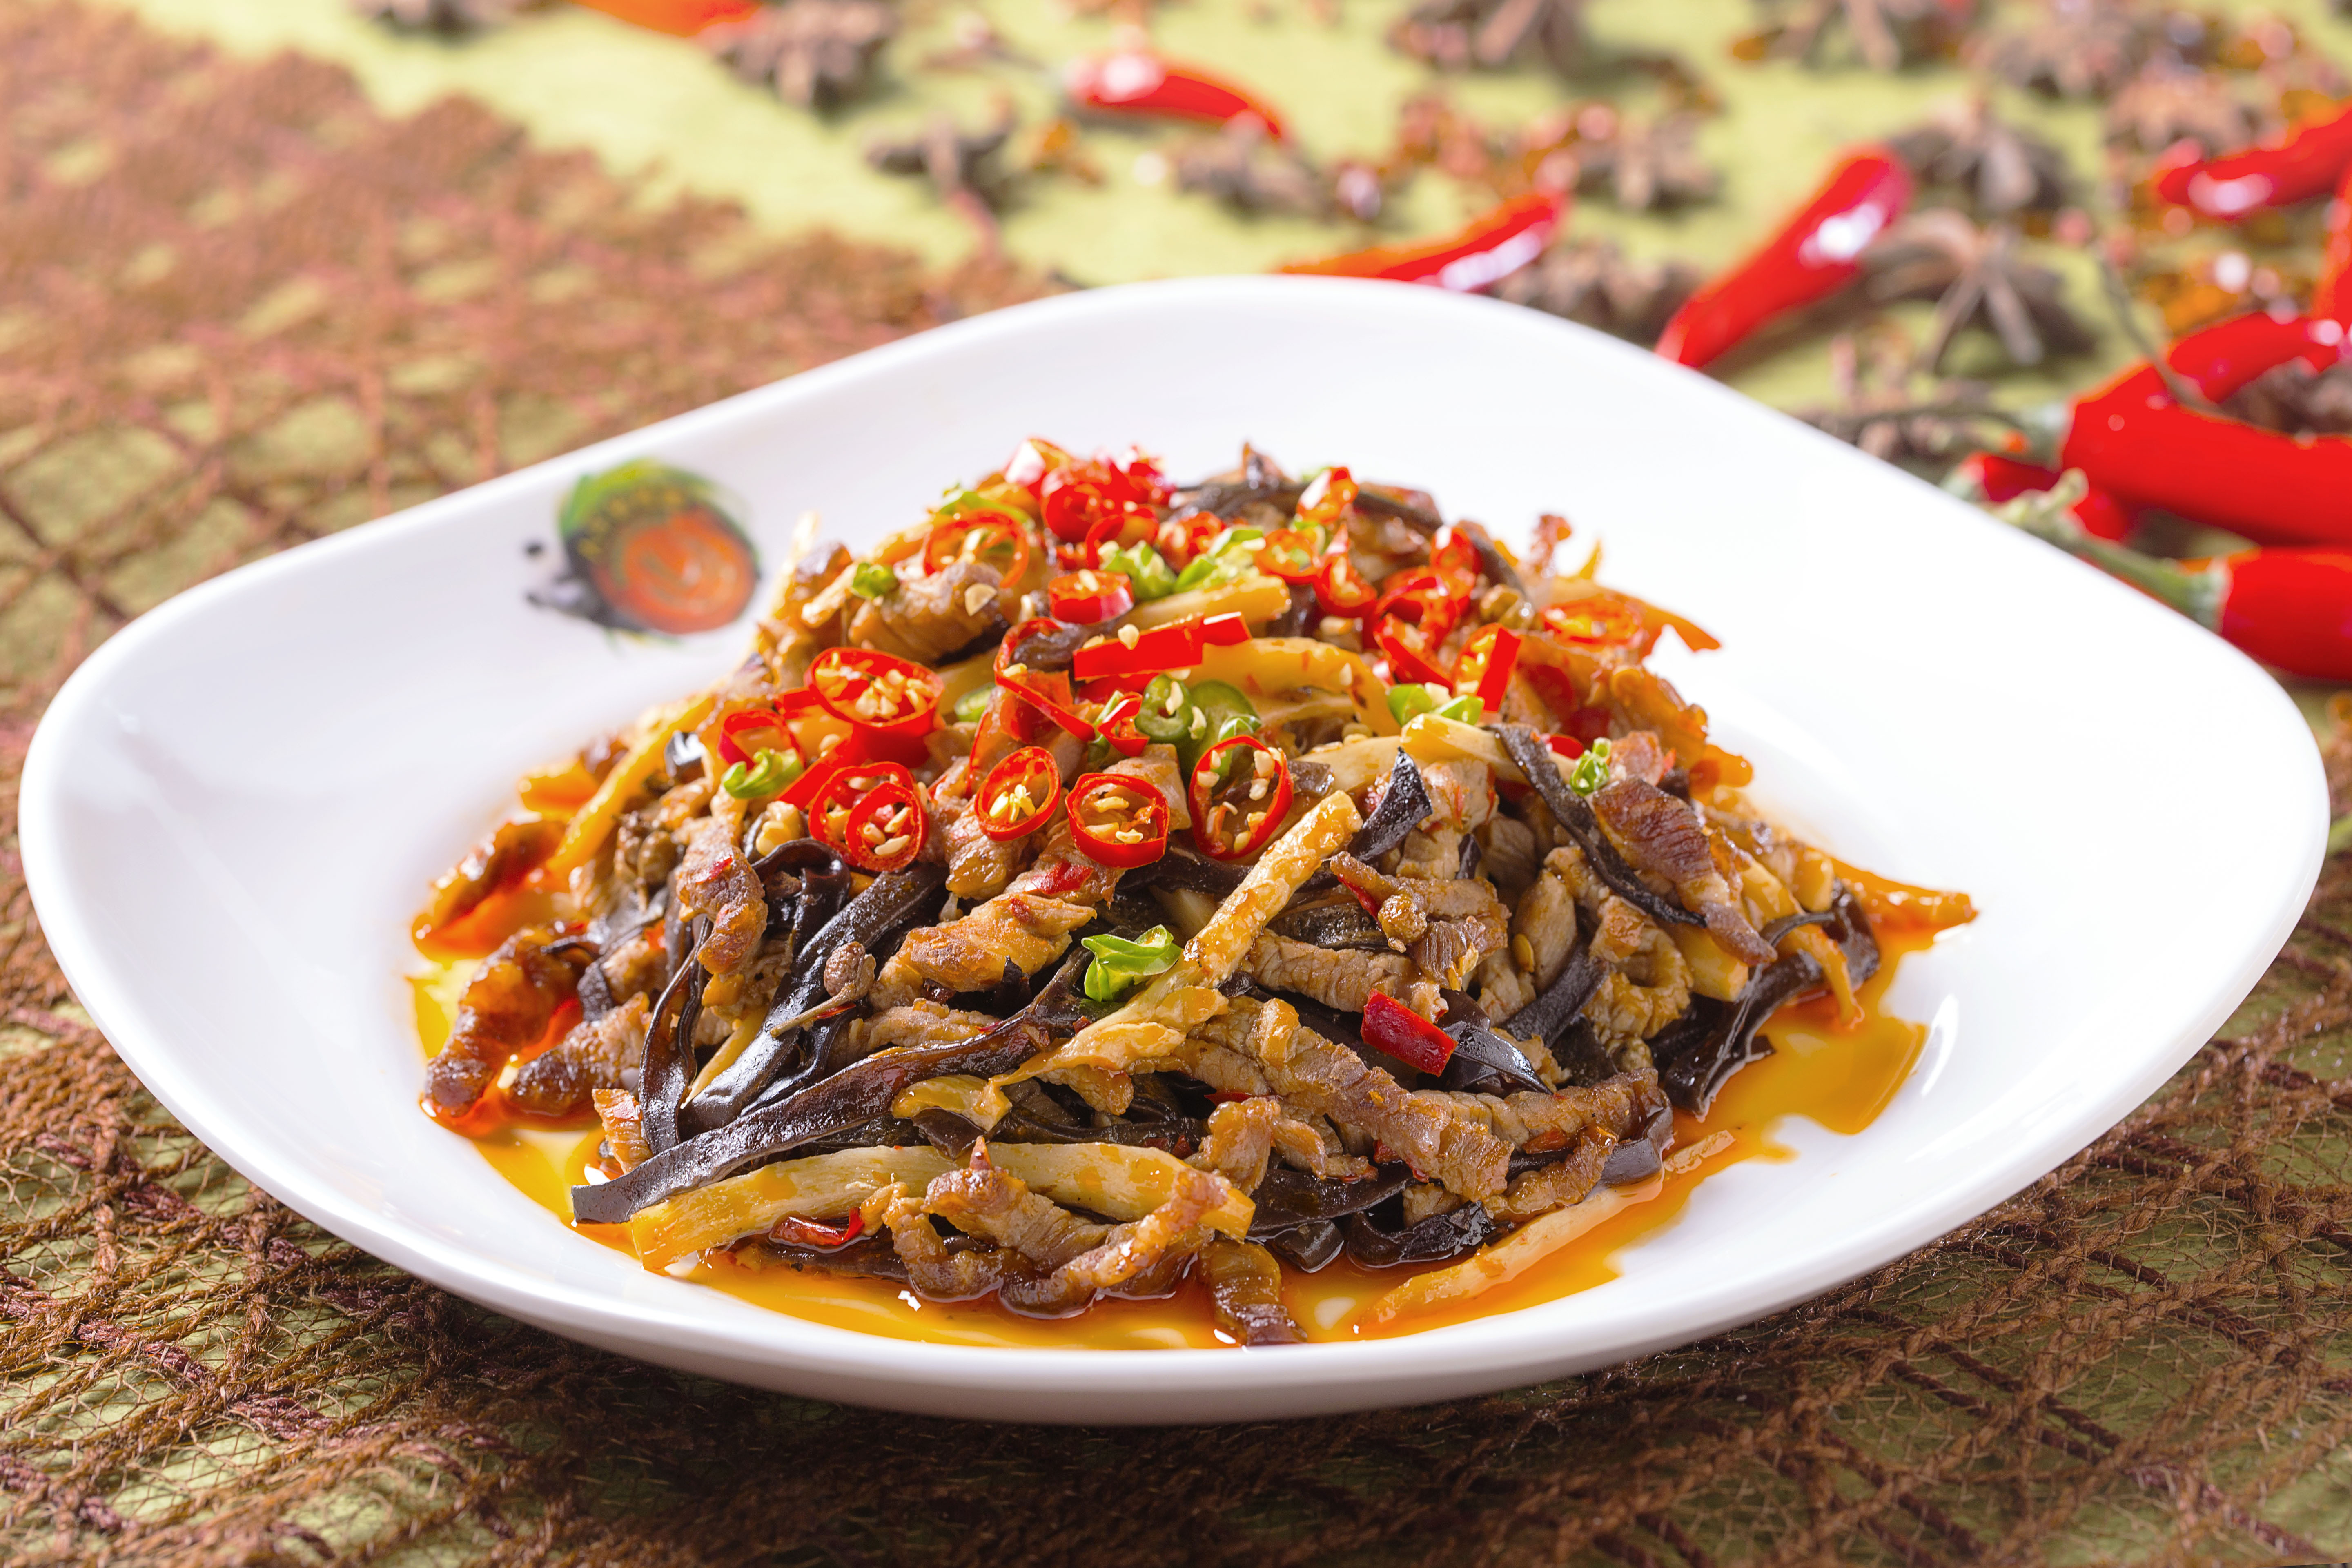 Sautéed Shredded Pork in Spicy and Chili Sauce